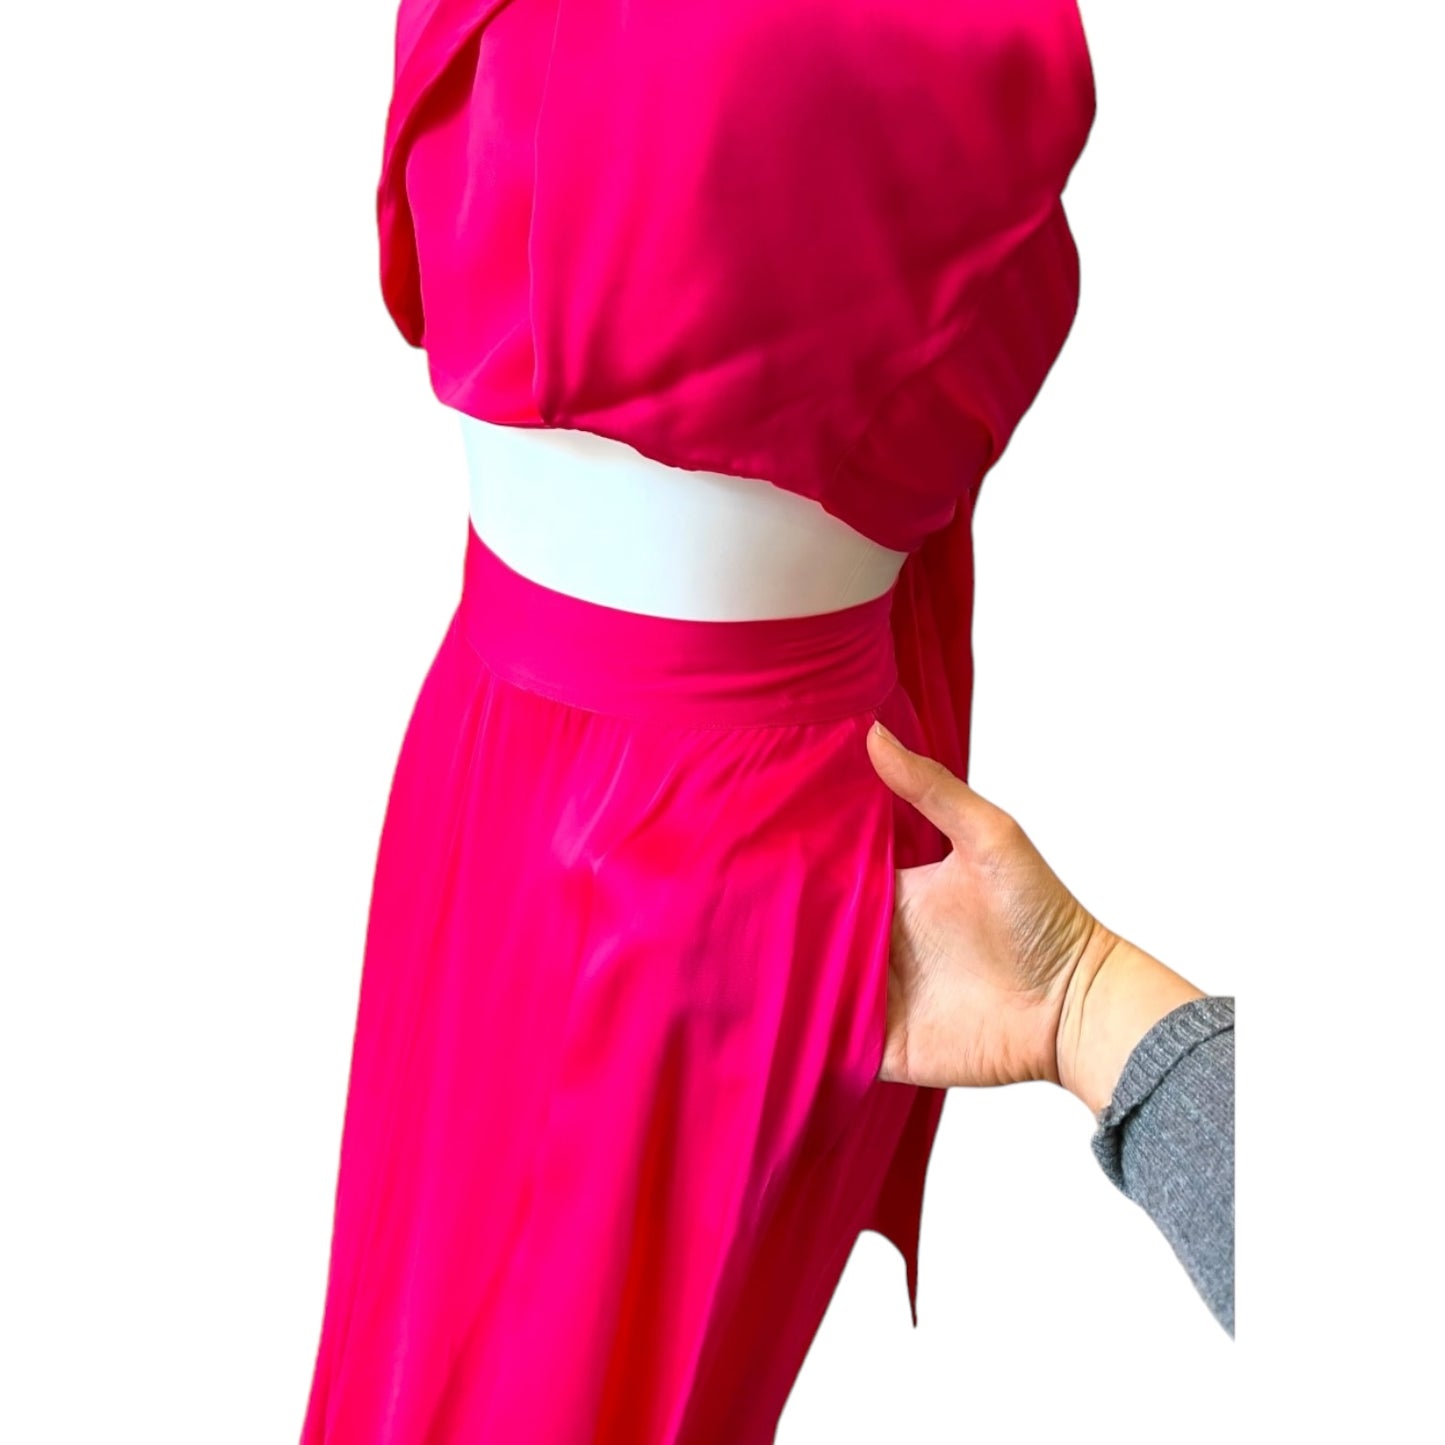 Reiss Pink Two Piece, size 8